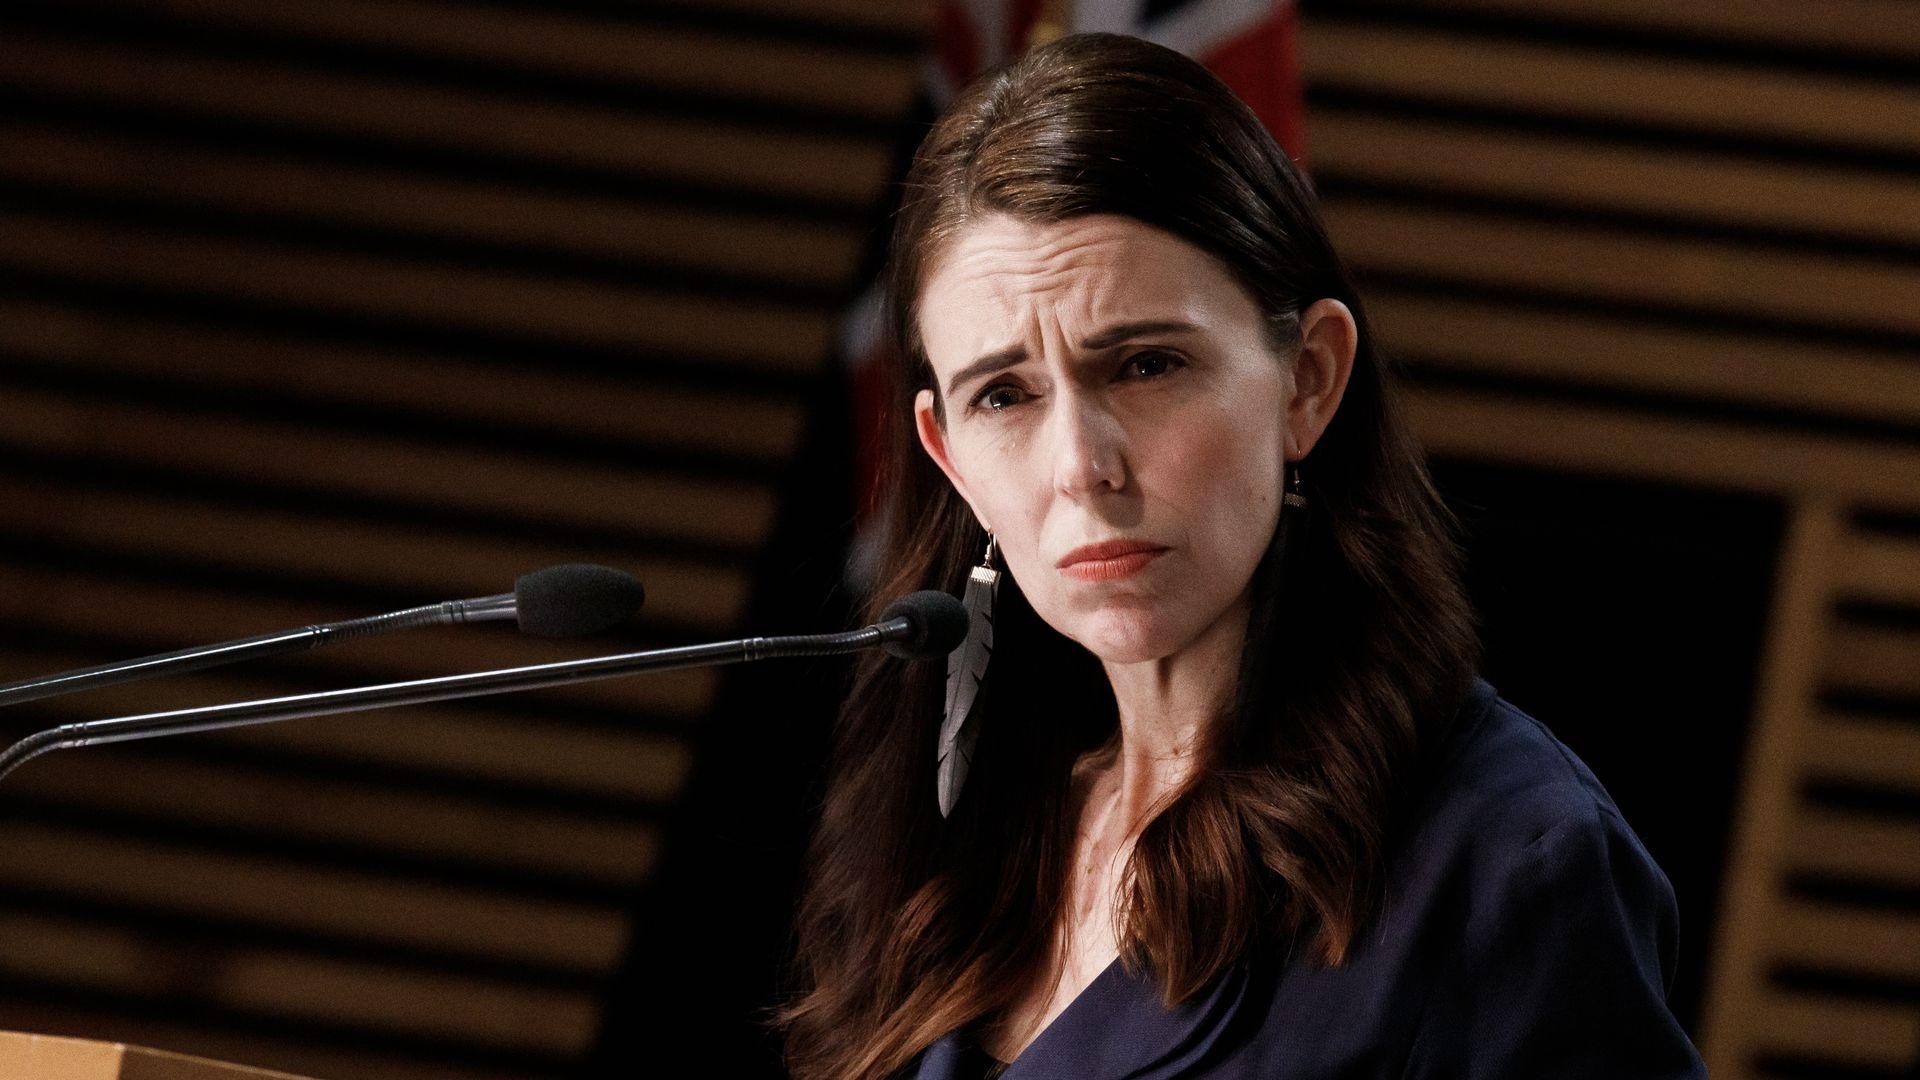 Prime Minister Jacinda Ardern reacts during a COVID-19 response update at Parliament on Saturday in Wellington, New Zealand.